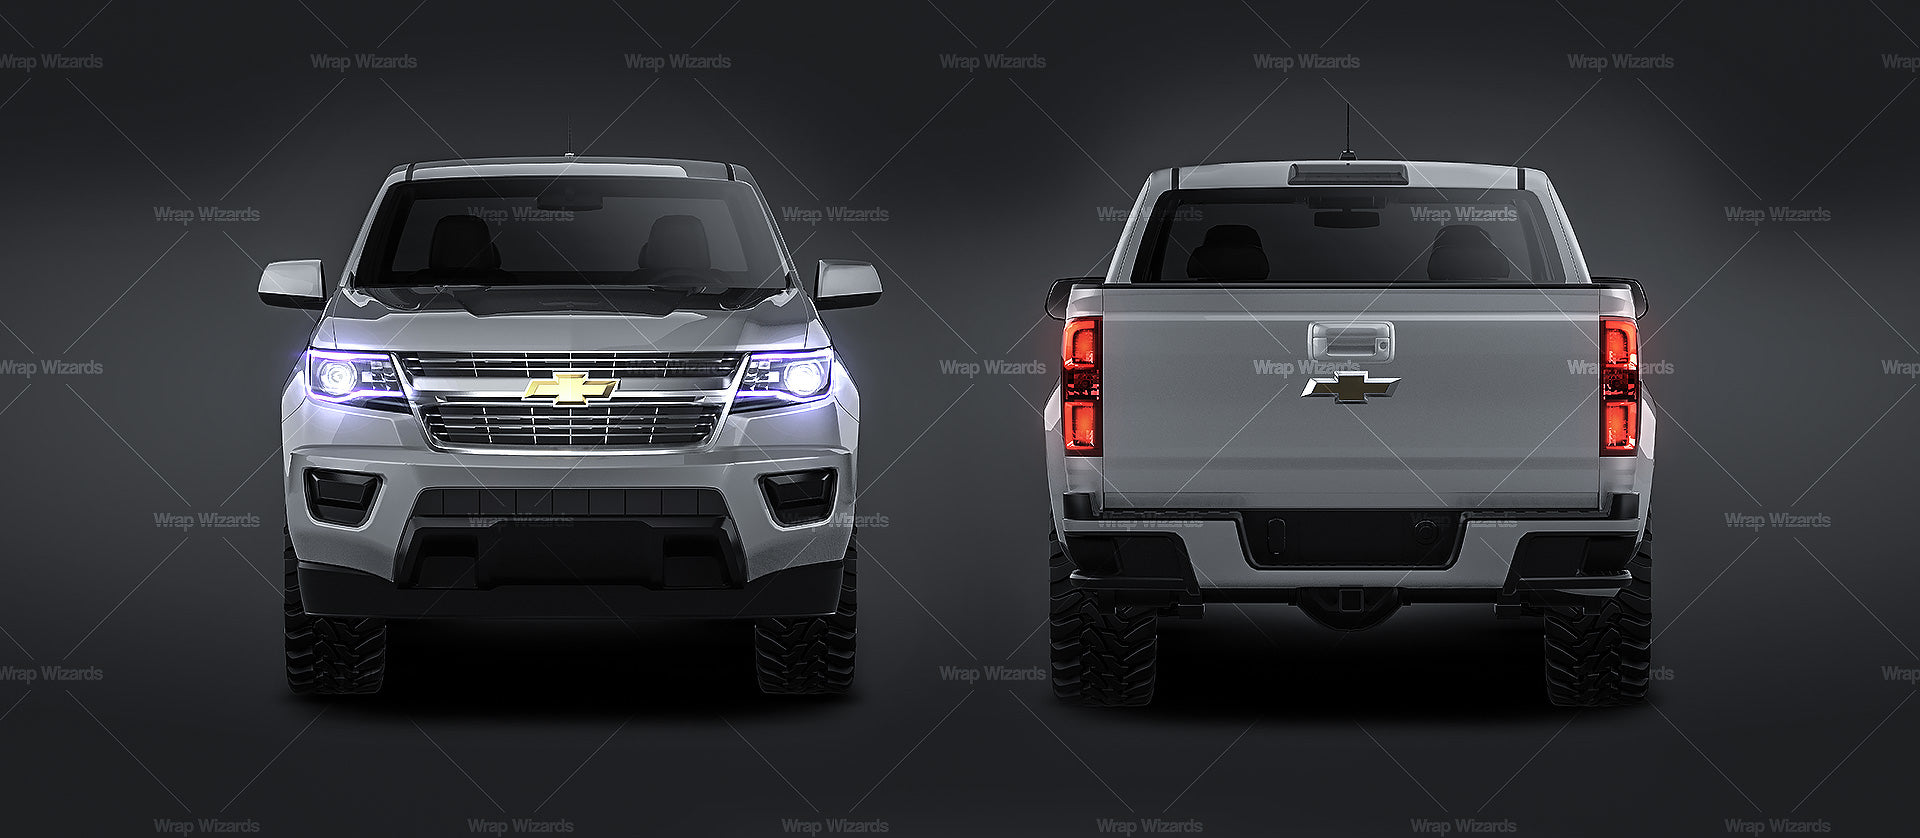 Chevrolet Colorado 2018 extended cab - Truck/Pick-up Mockup